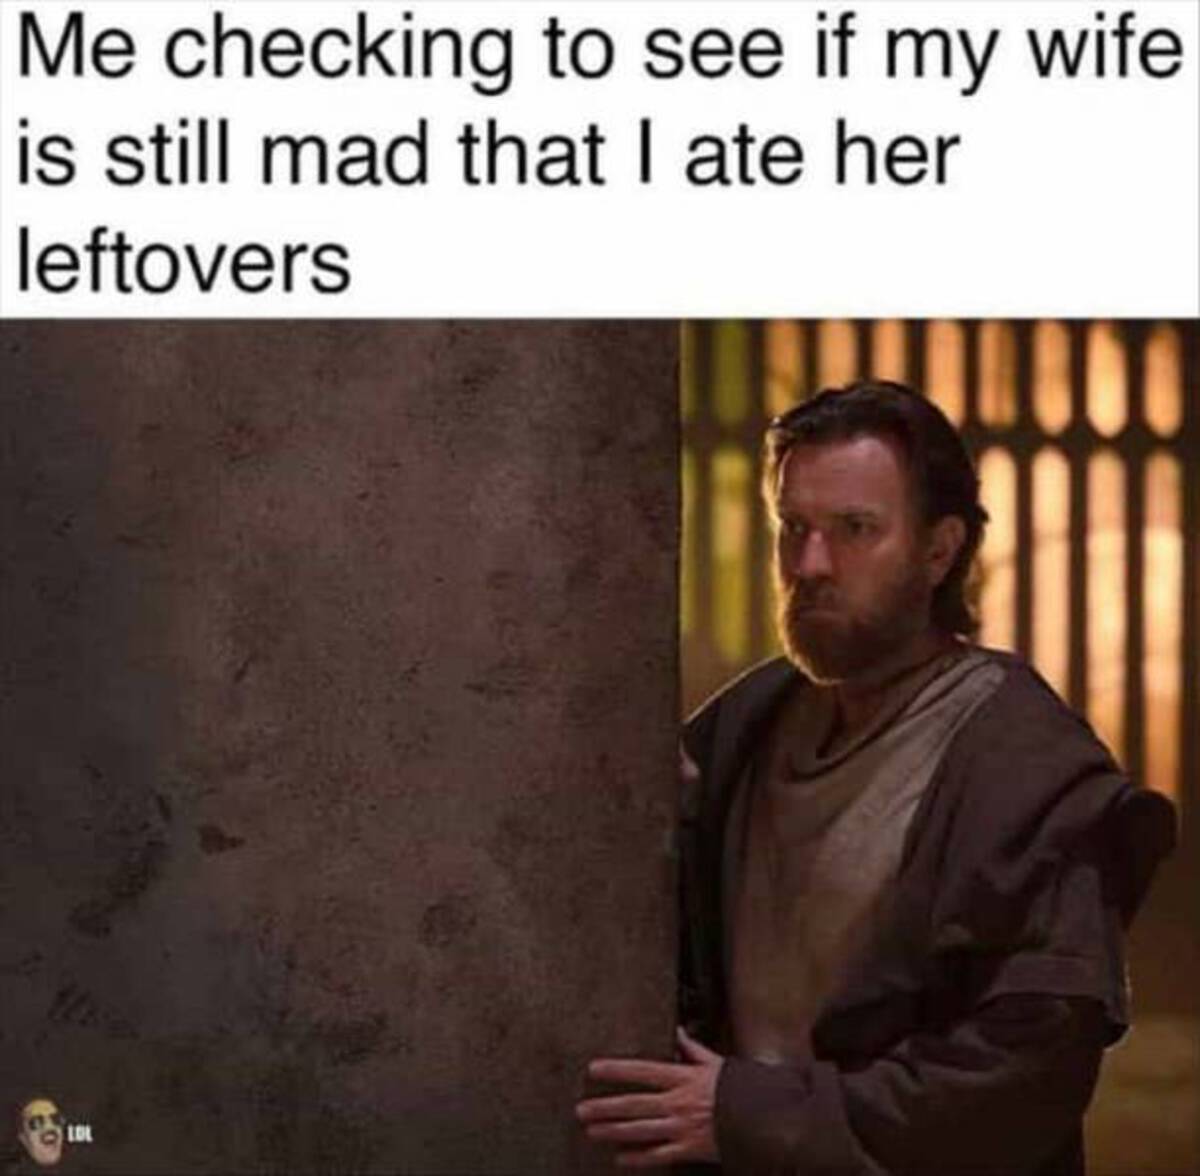 kenobi entertainment weekly - Me checking to see if my wife is still mad that I ate her leftovers Lol